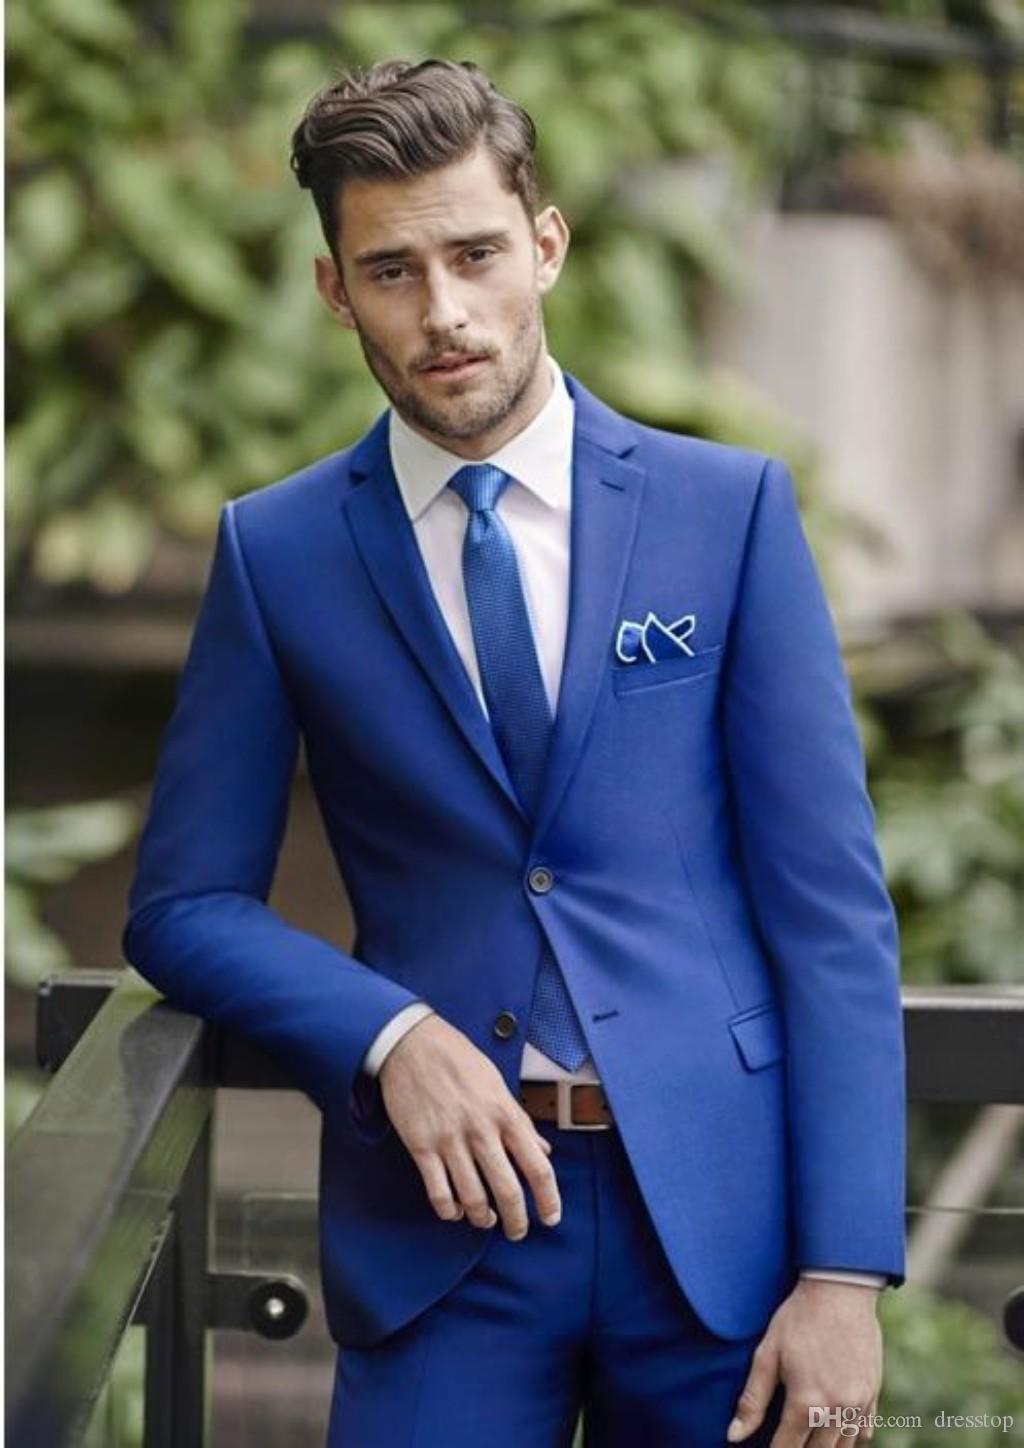 Blue wedding suits are a perfect match for a spring wedding